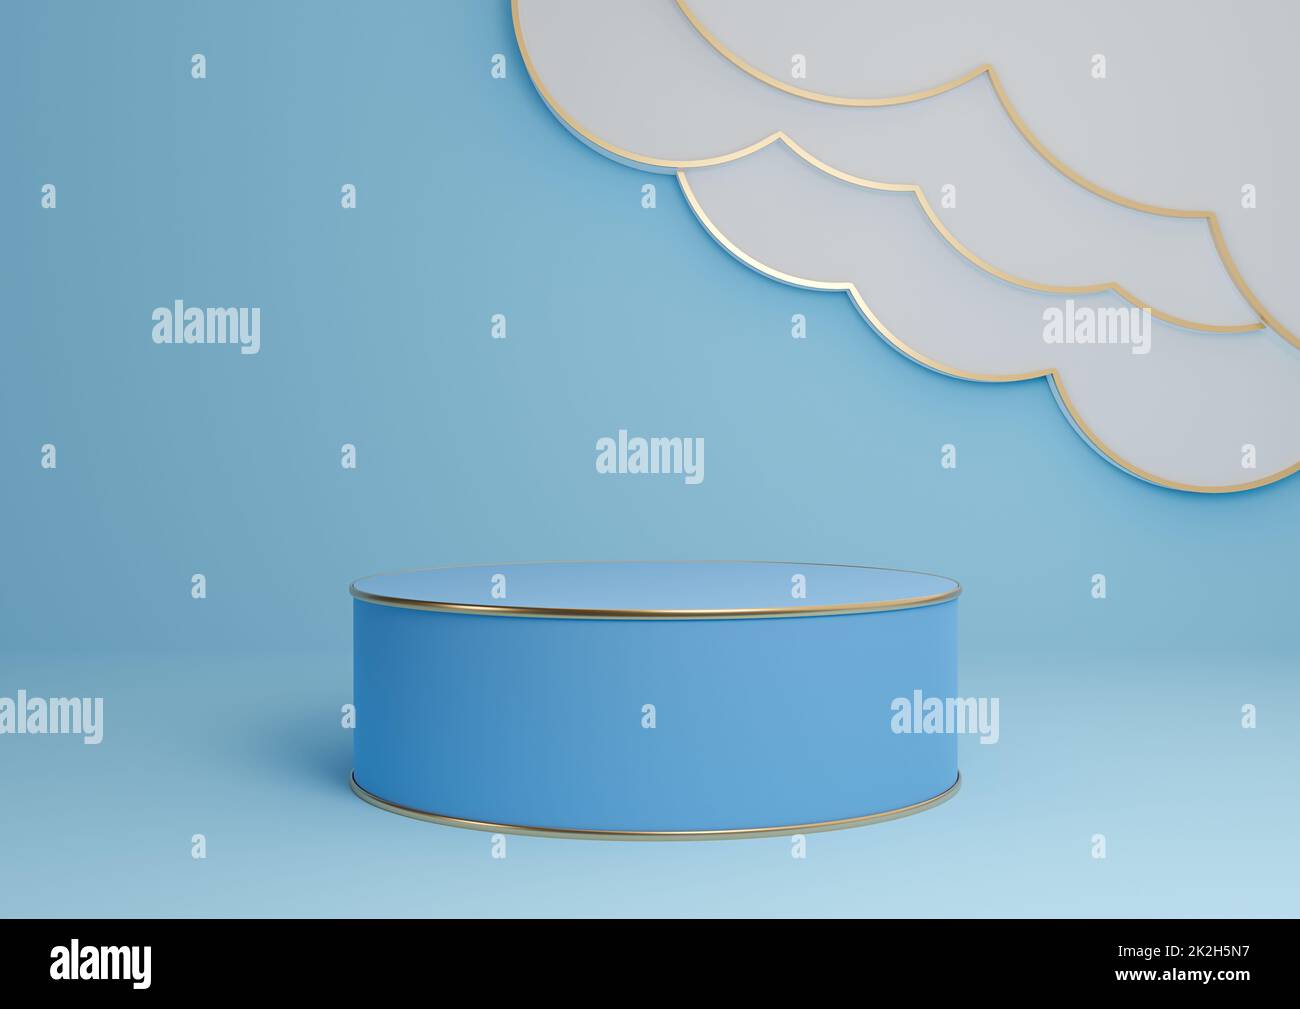 Bright, light sky blue 3D rendering product display podium or stand with abstract clouds and golden lines luxurious minimal, simple composition background cylinder platform Stock Photo